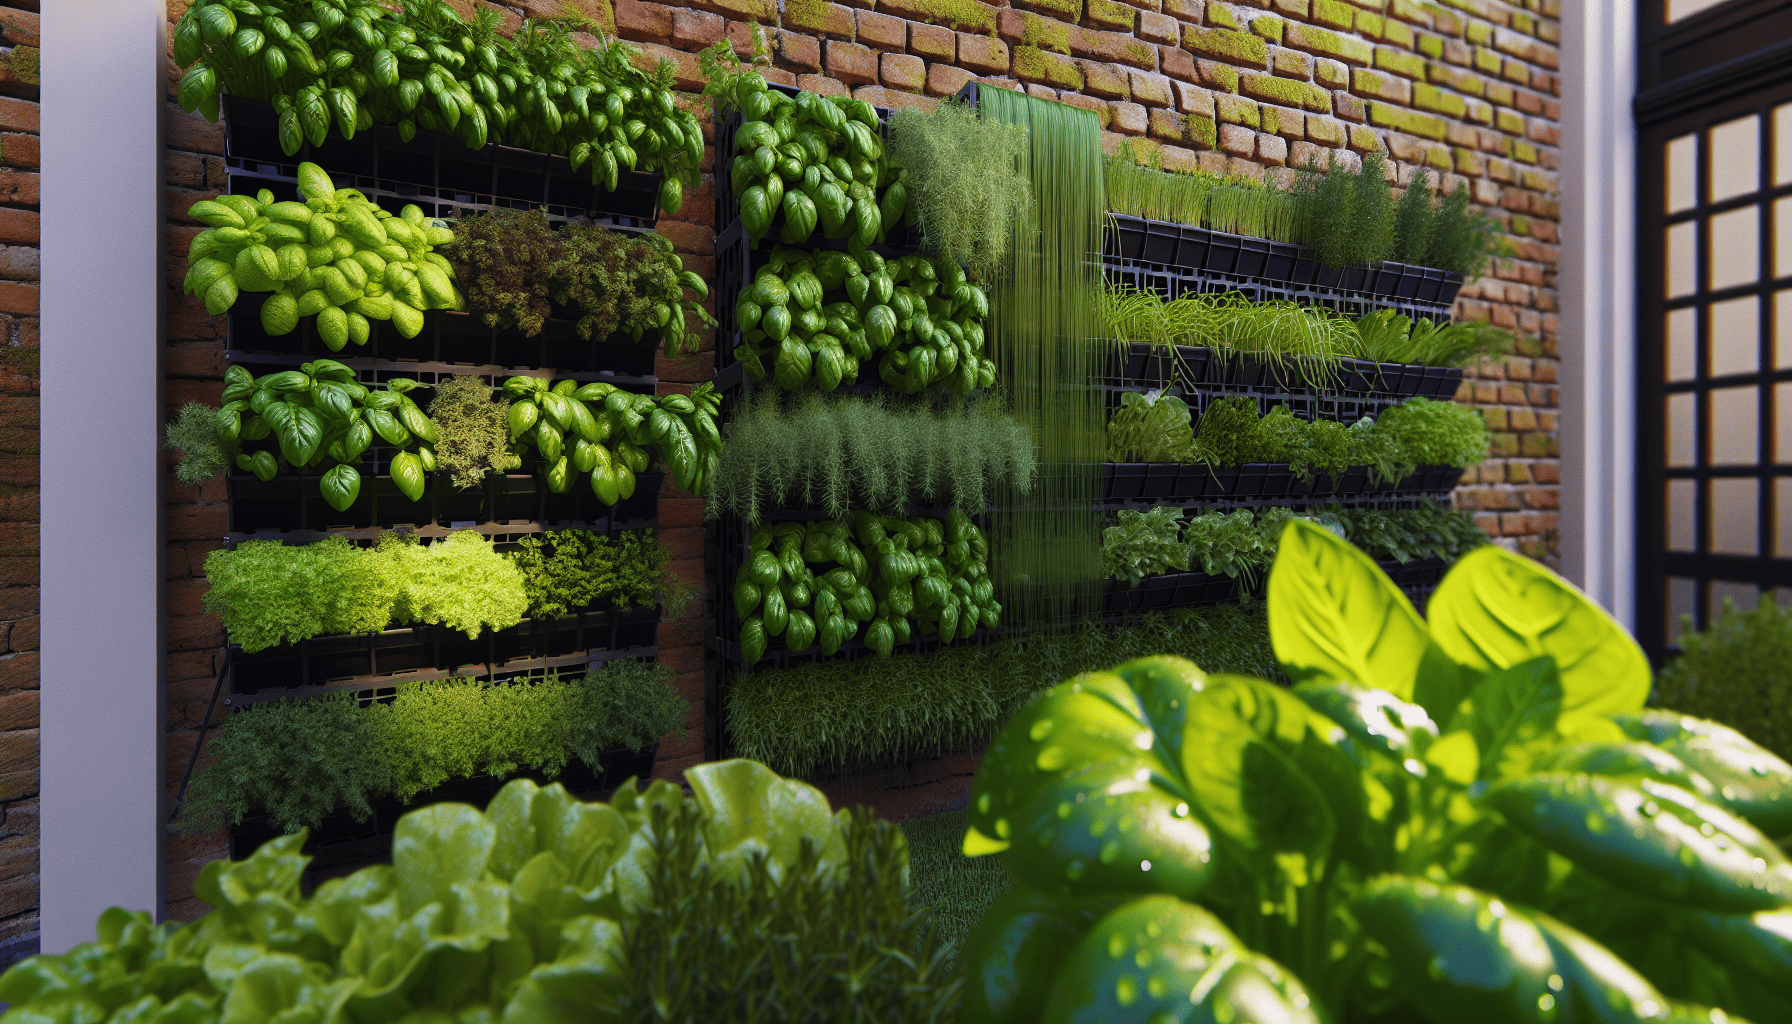 Space-efficient edible vertical gardens with vertical herb towers and salad wall planters